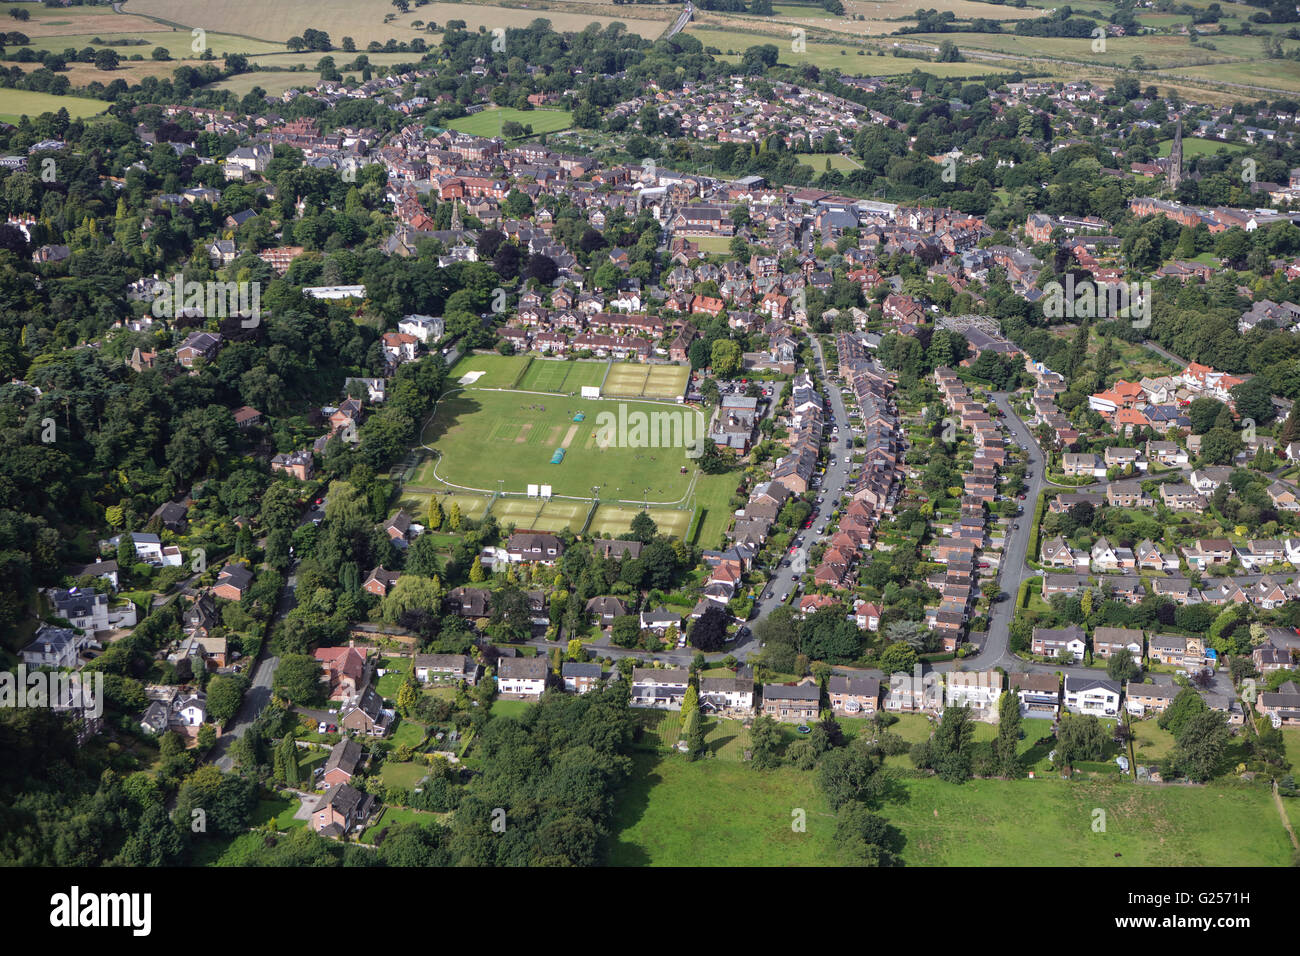 An aerial view of the Cheshire village of Alderley Edge Stock Photo